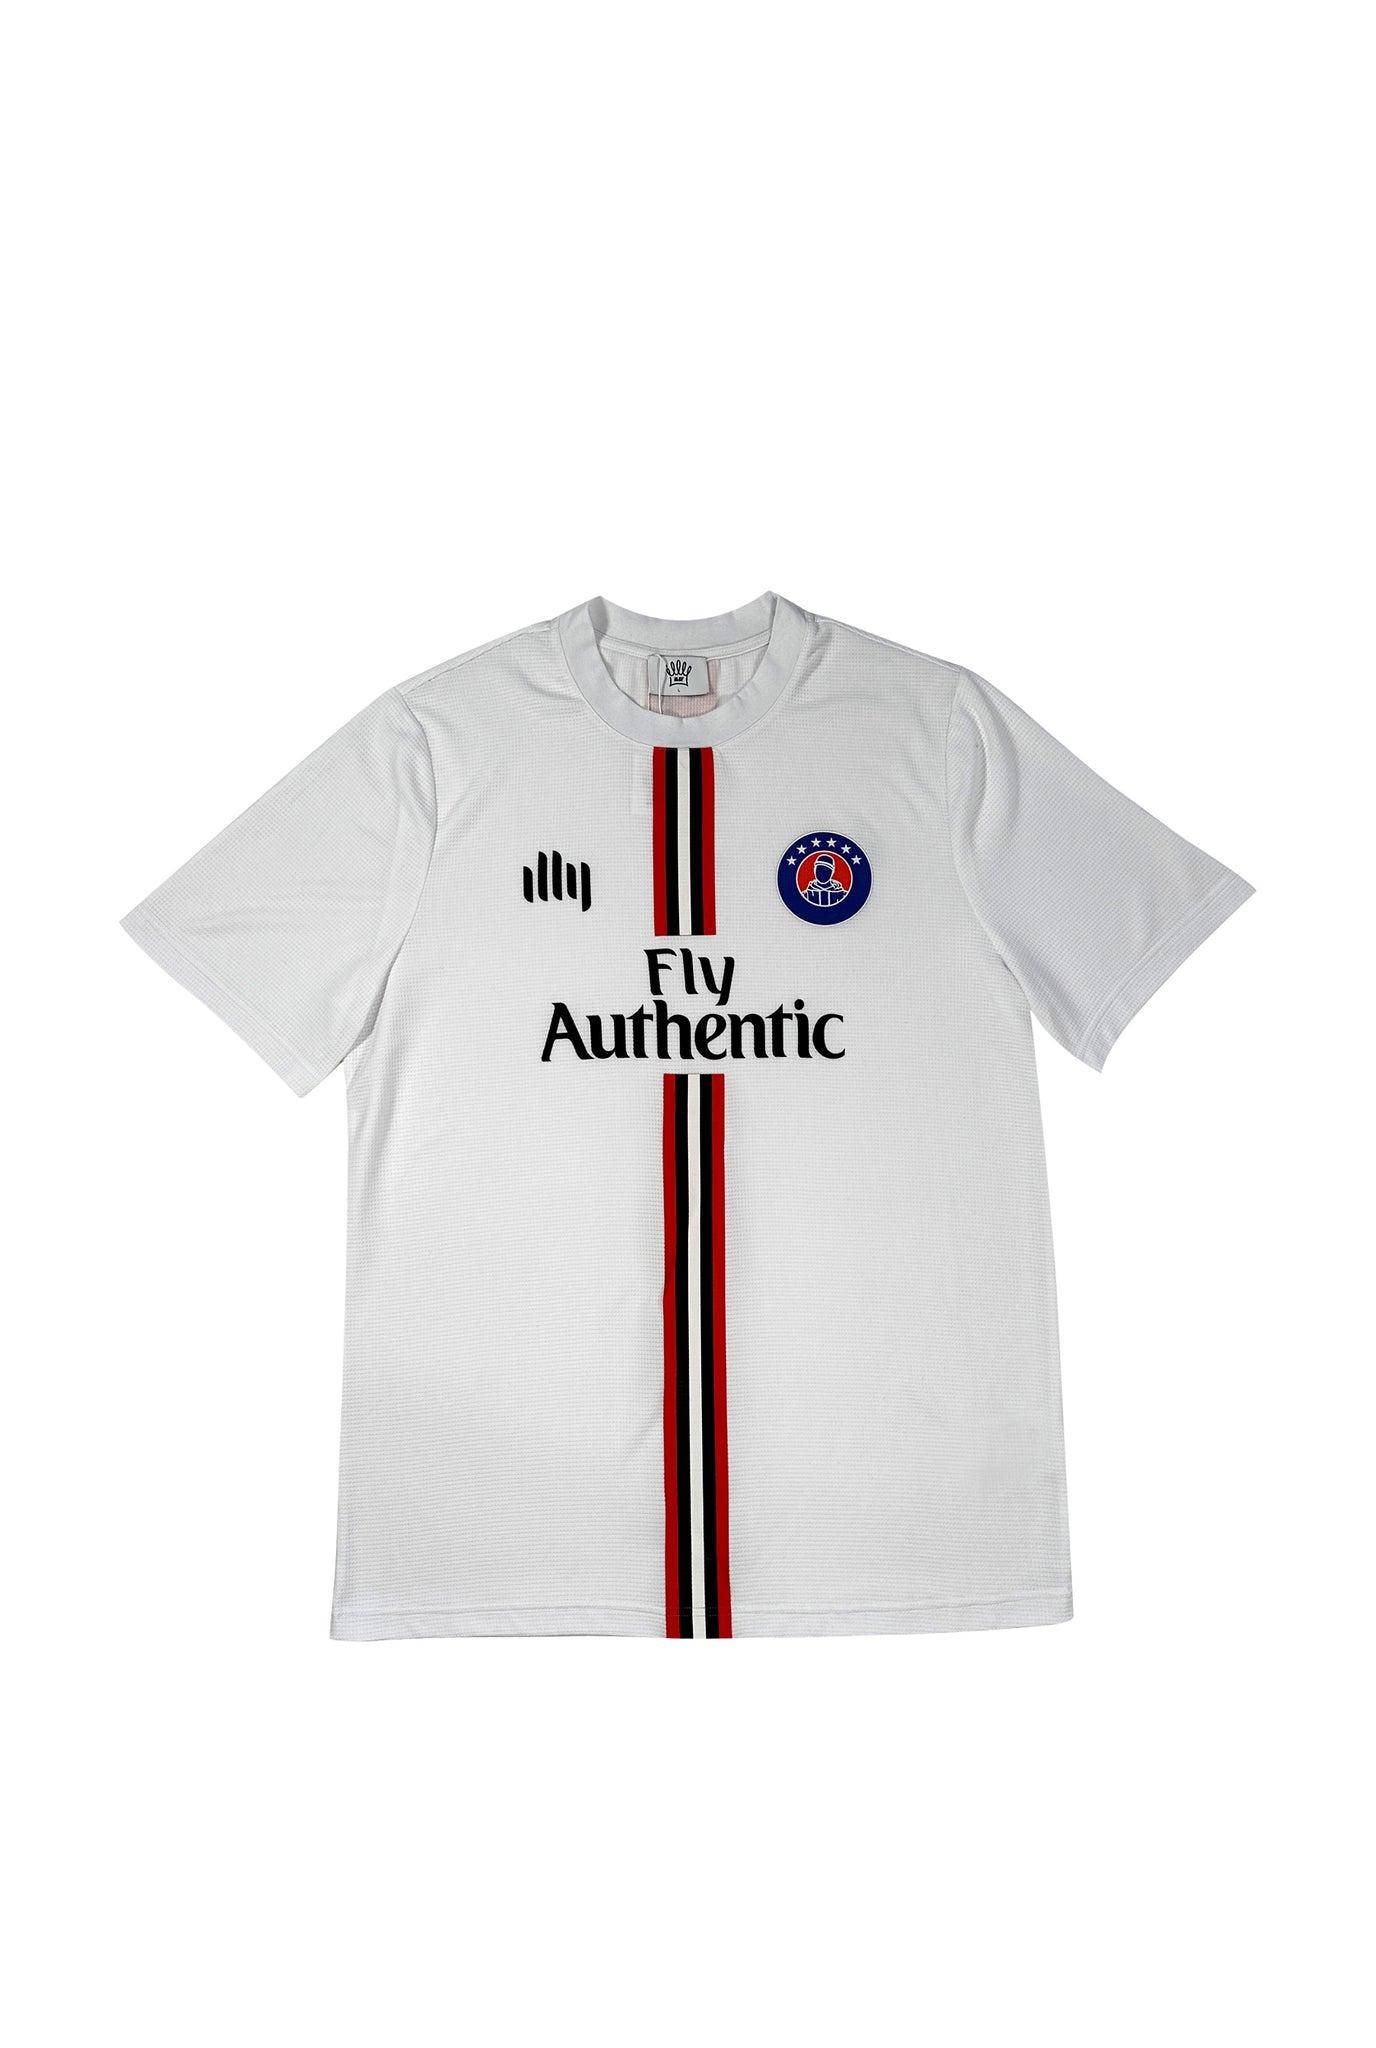 ILLY JERSEY IN WHITE